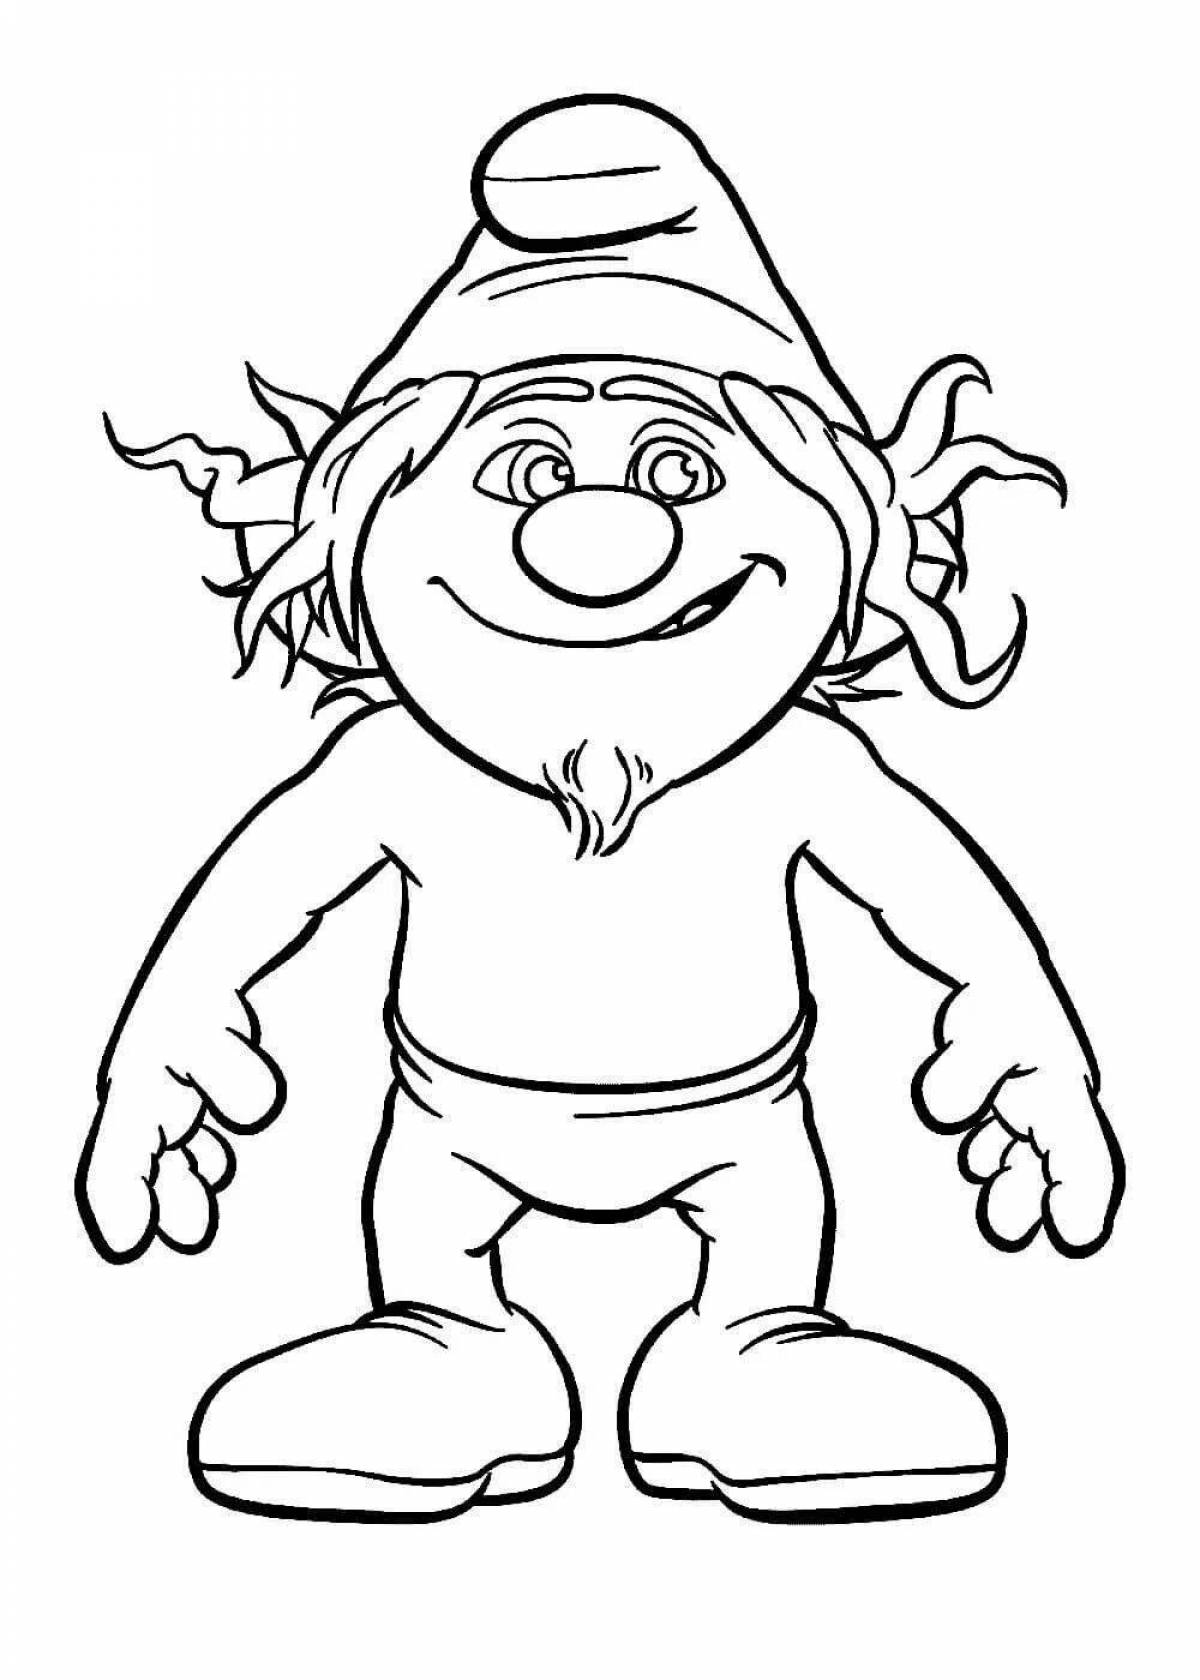 Color-frenzy gnome coloring page for 3-4 year olds